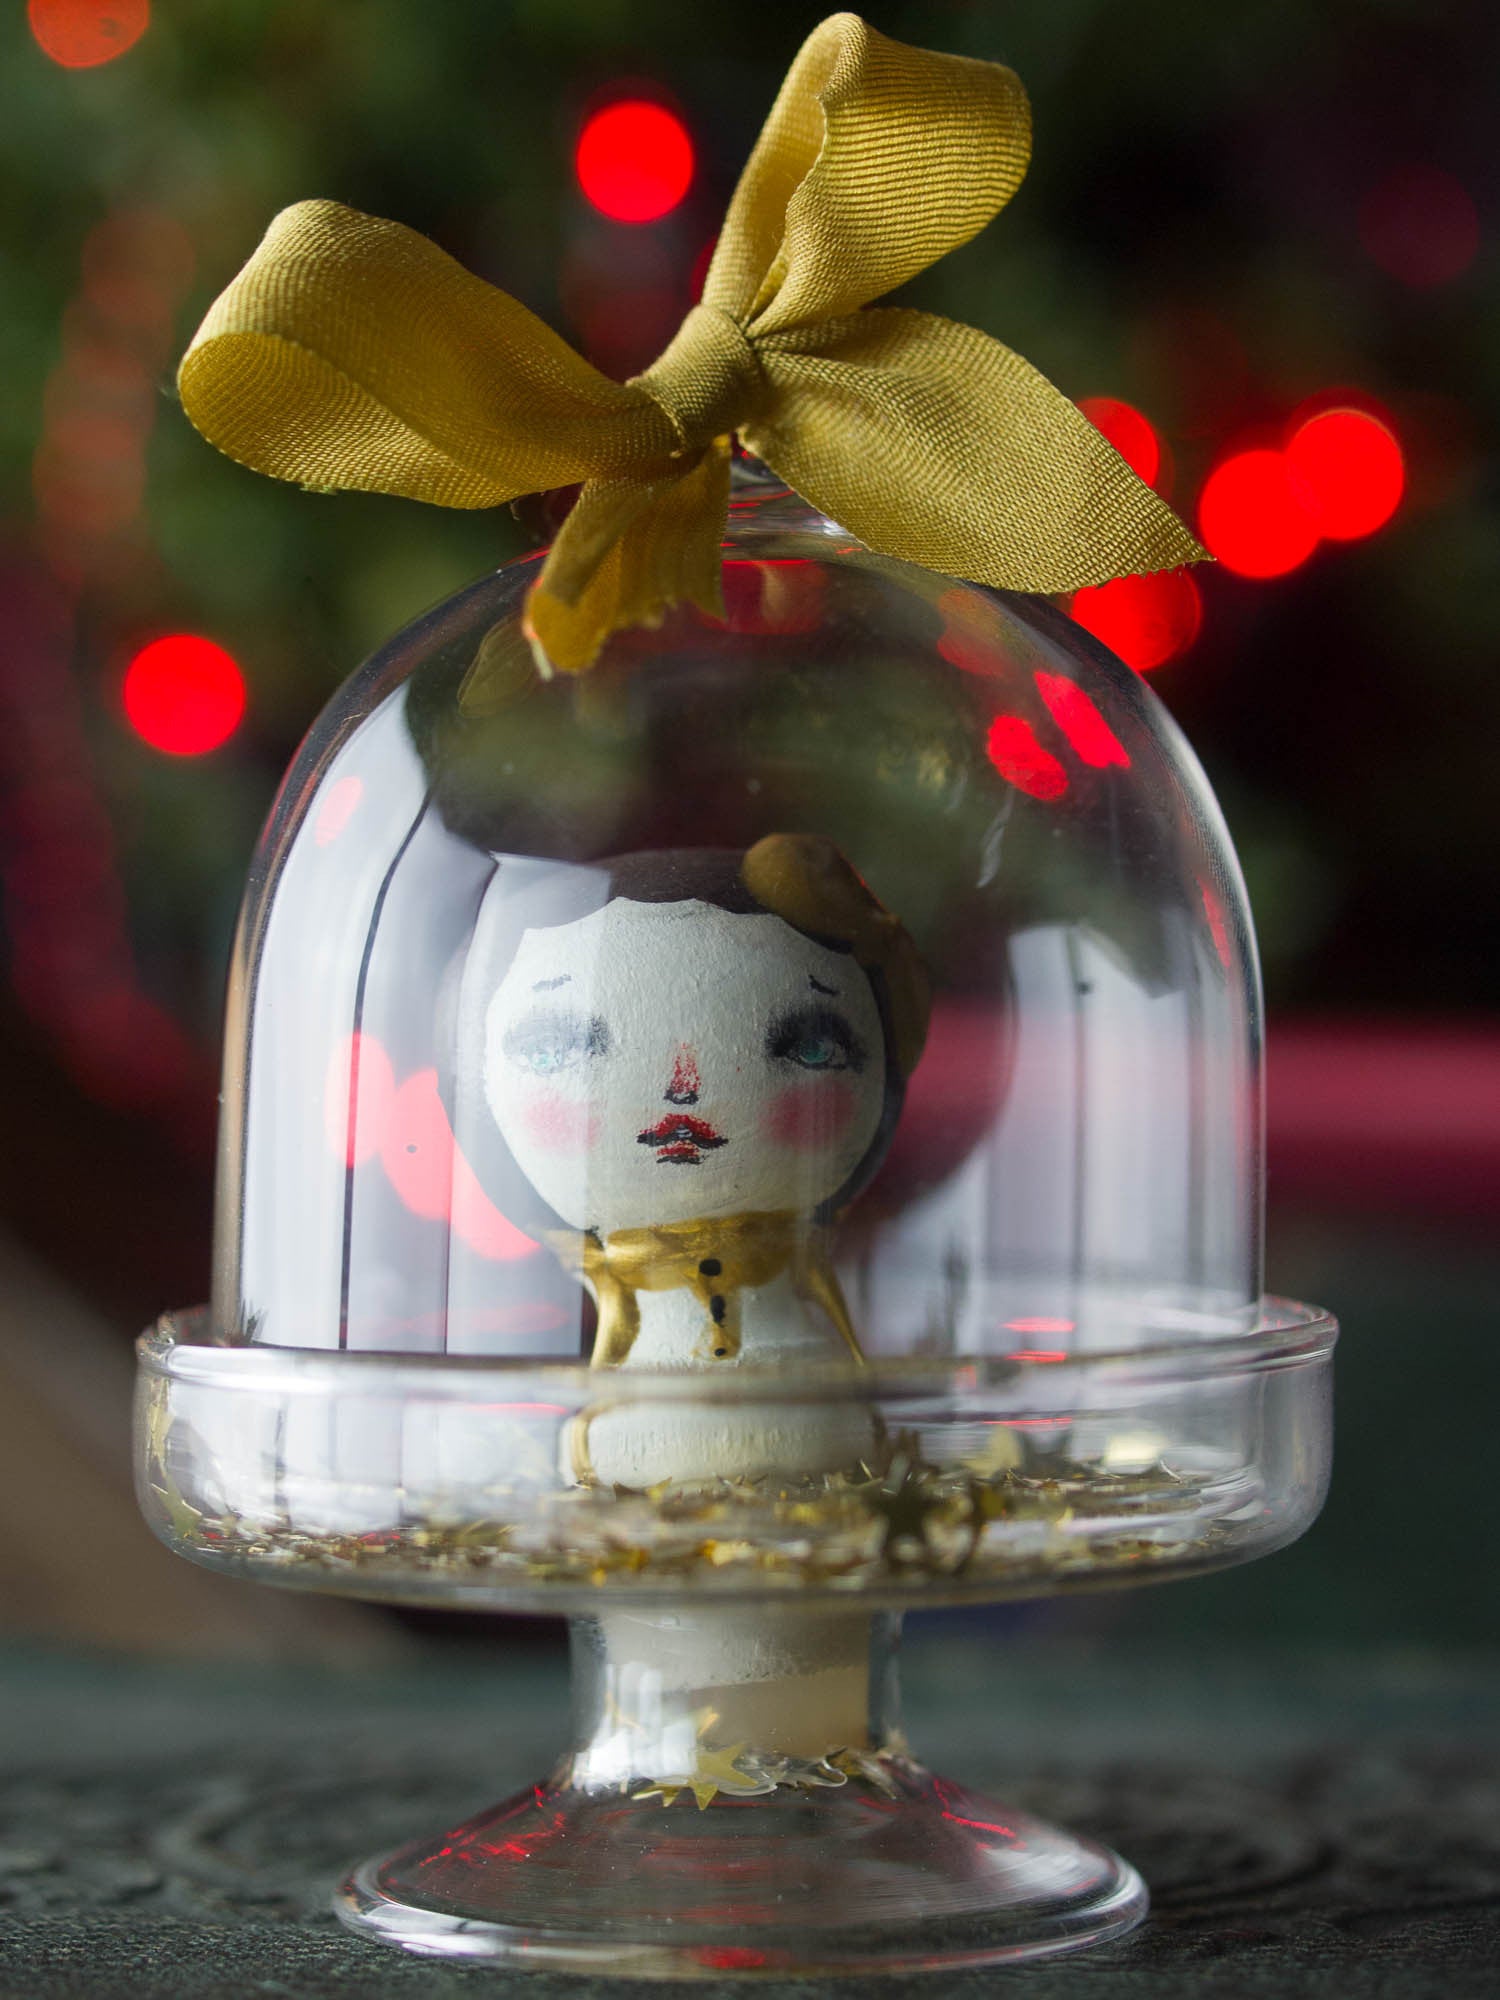 A mini kokeshi wooden art doll handmade by Danita Art, encased in a little glass dome for your Christmas tree.